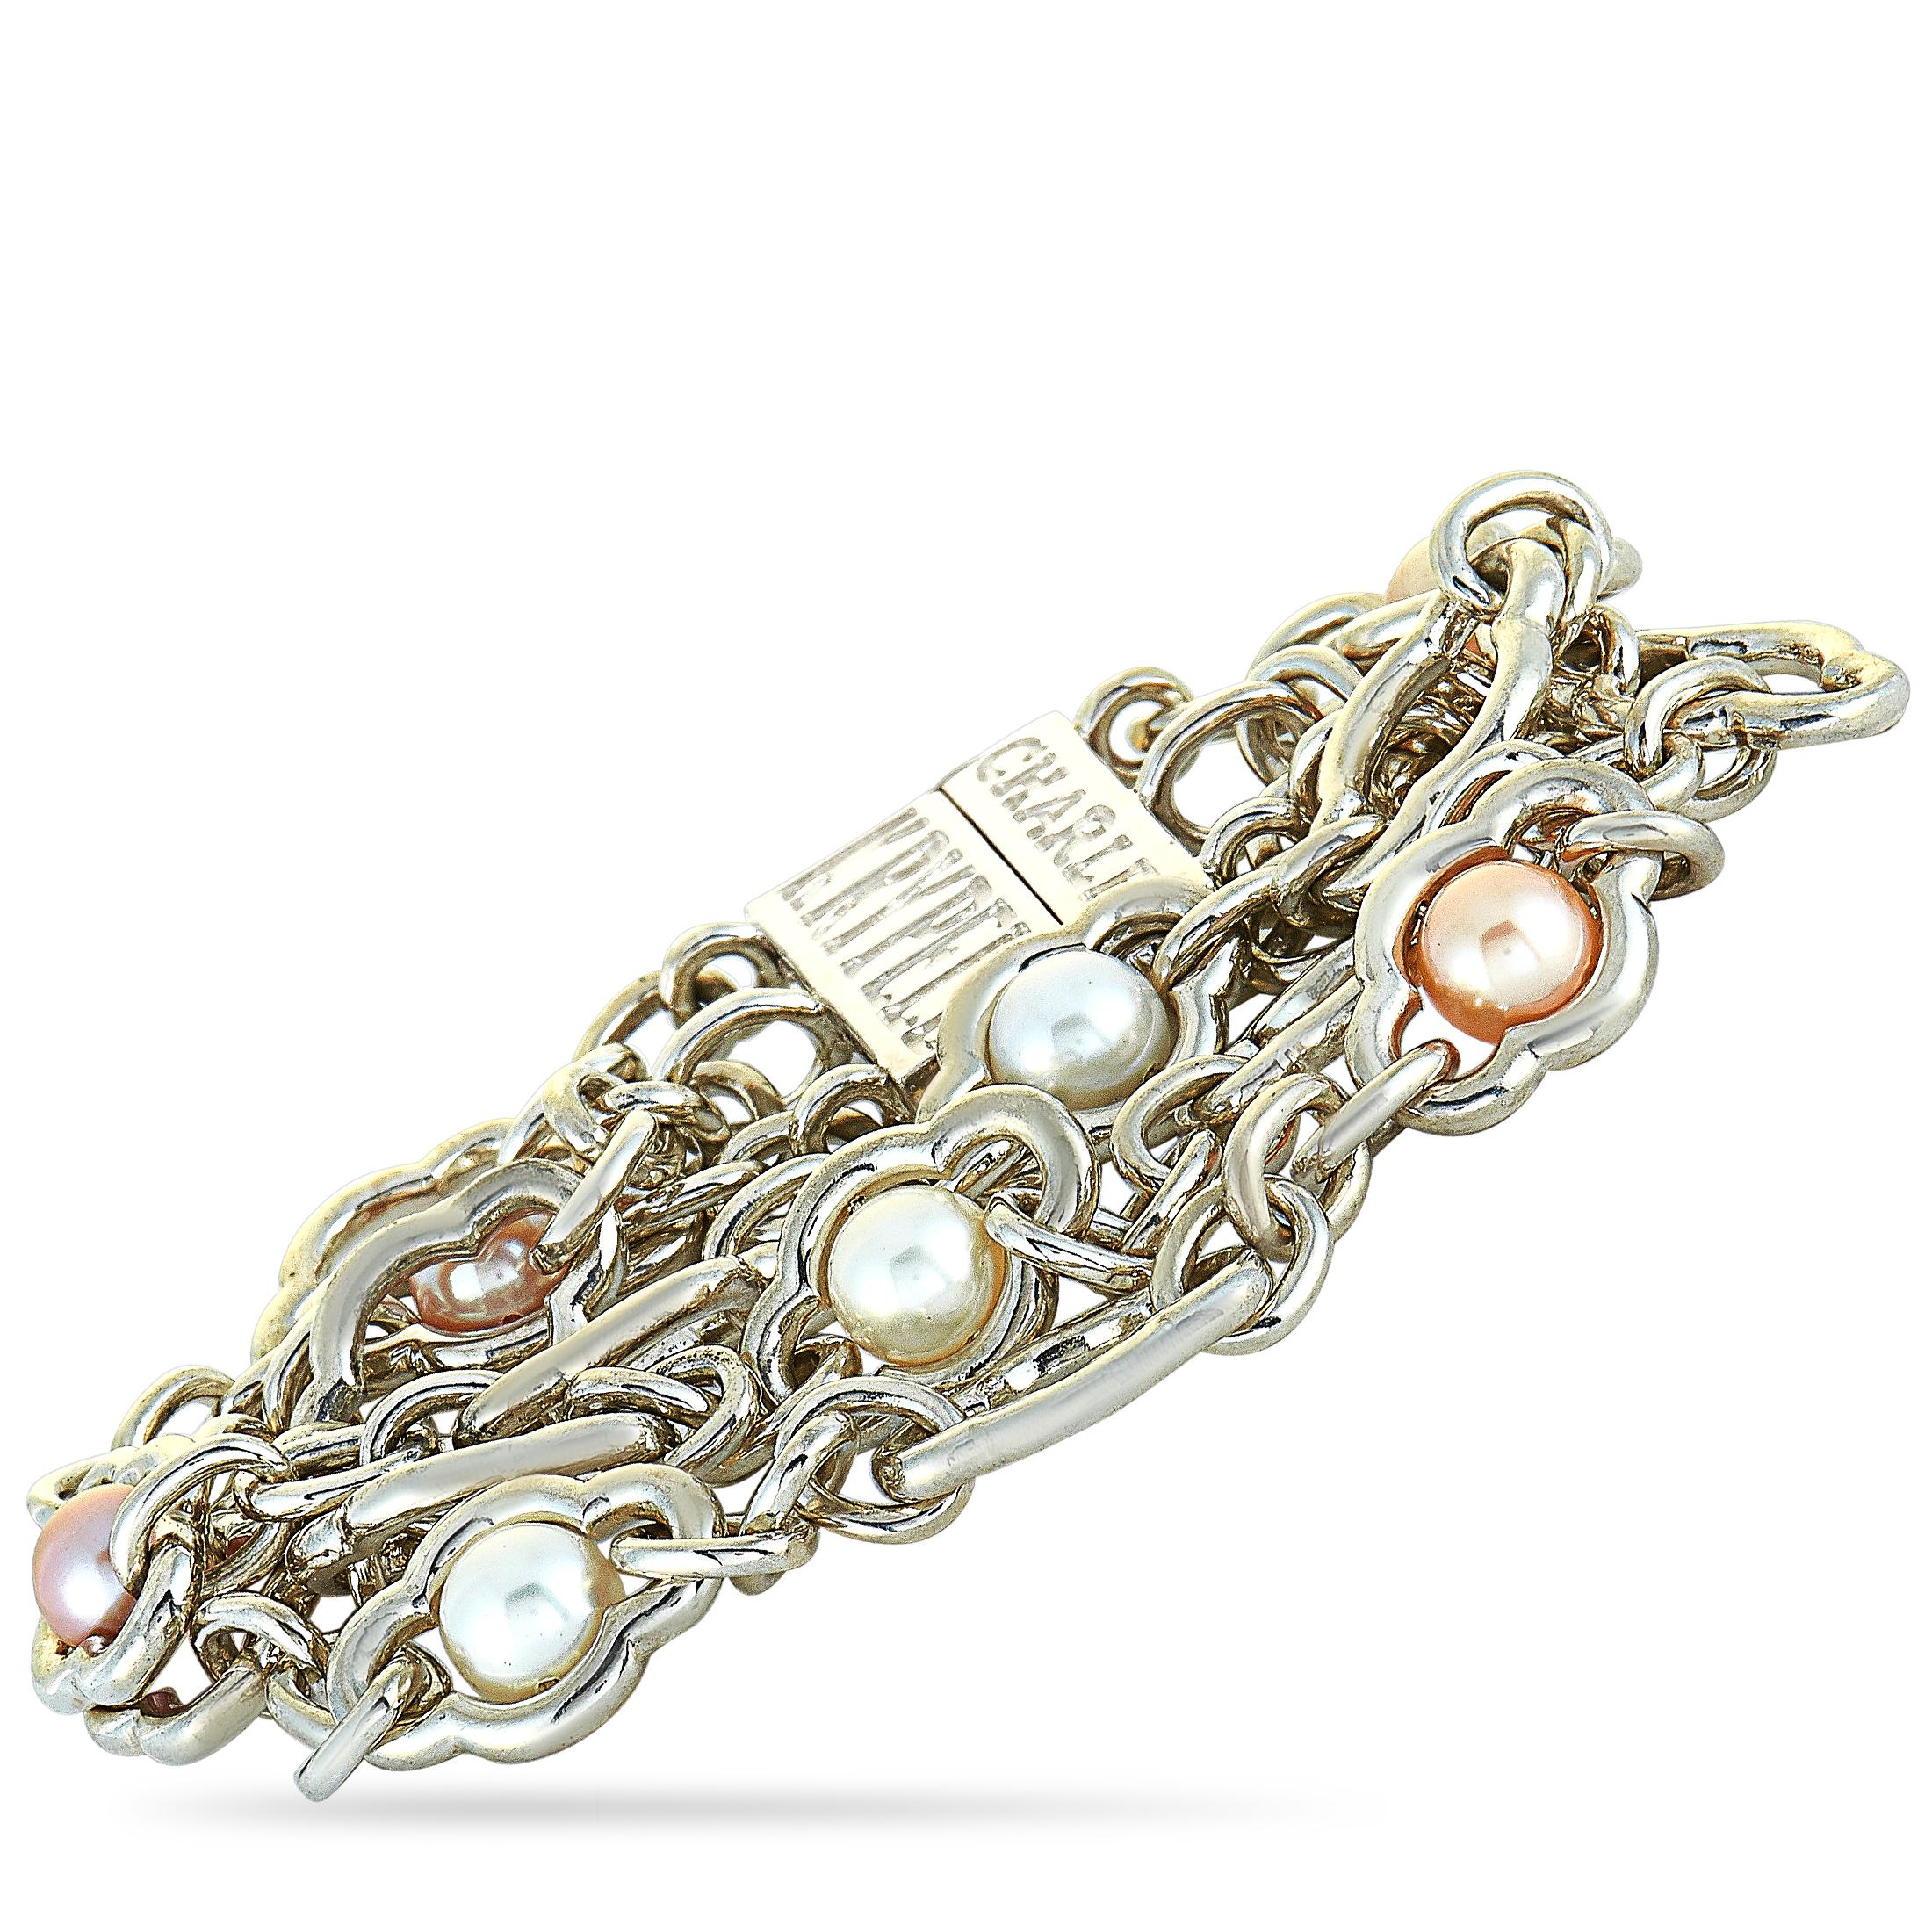 Women's Charles Krypell White Gold and Silver Pearl Multi-Row Chain Bracelet